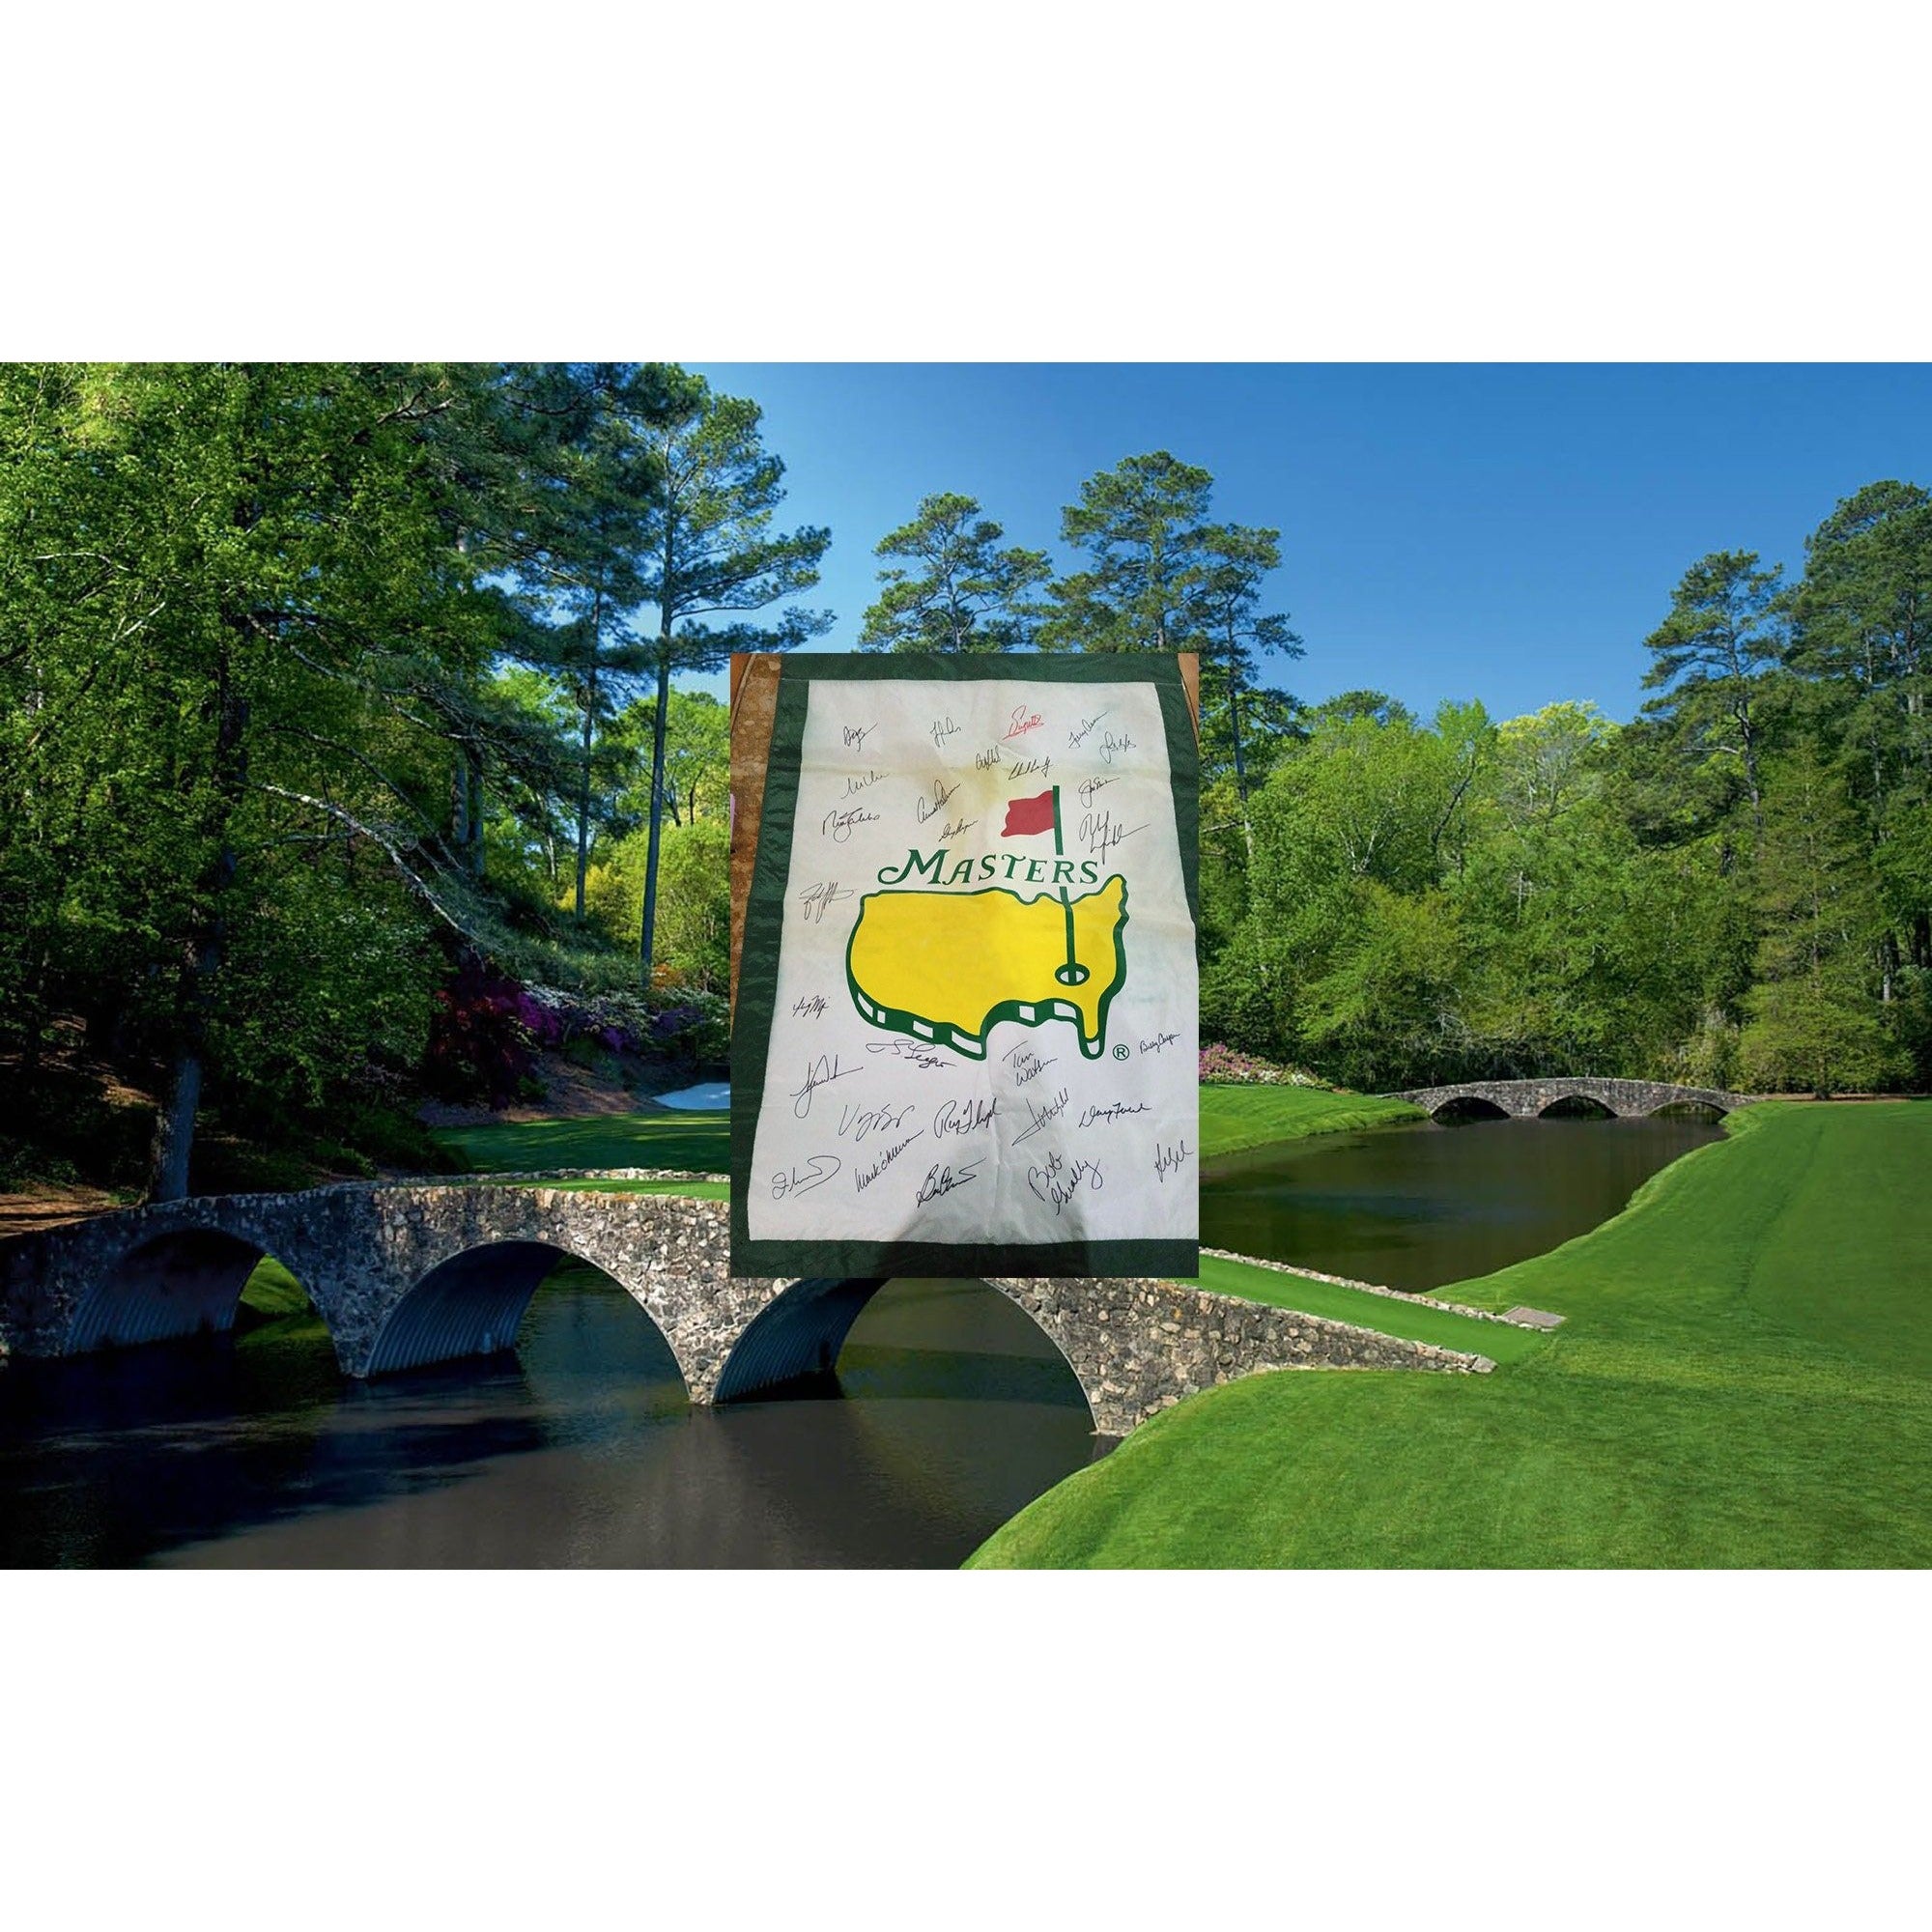 Tiger Woods, Jack Nicklaus, Phil Mickelson signed Masters golf banner with proof